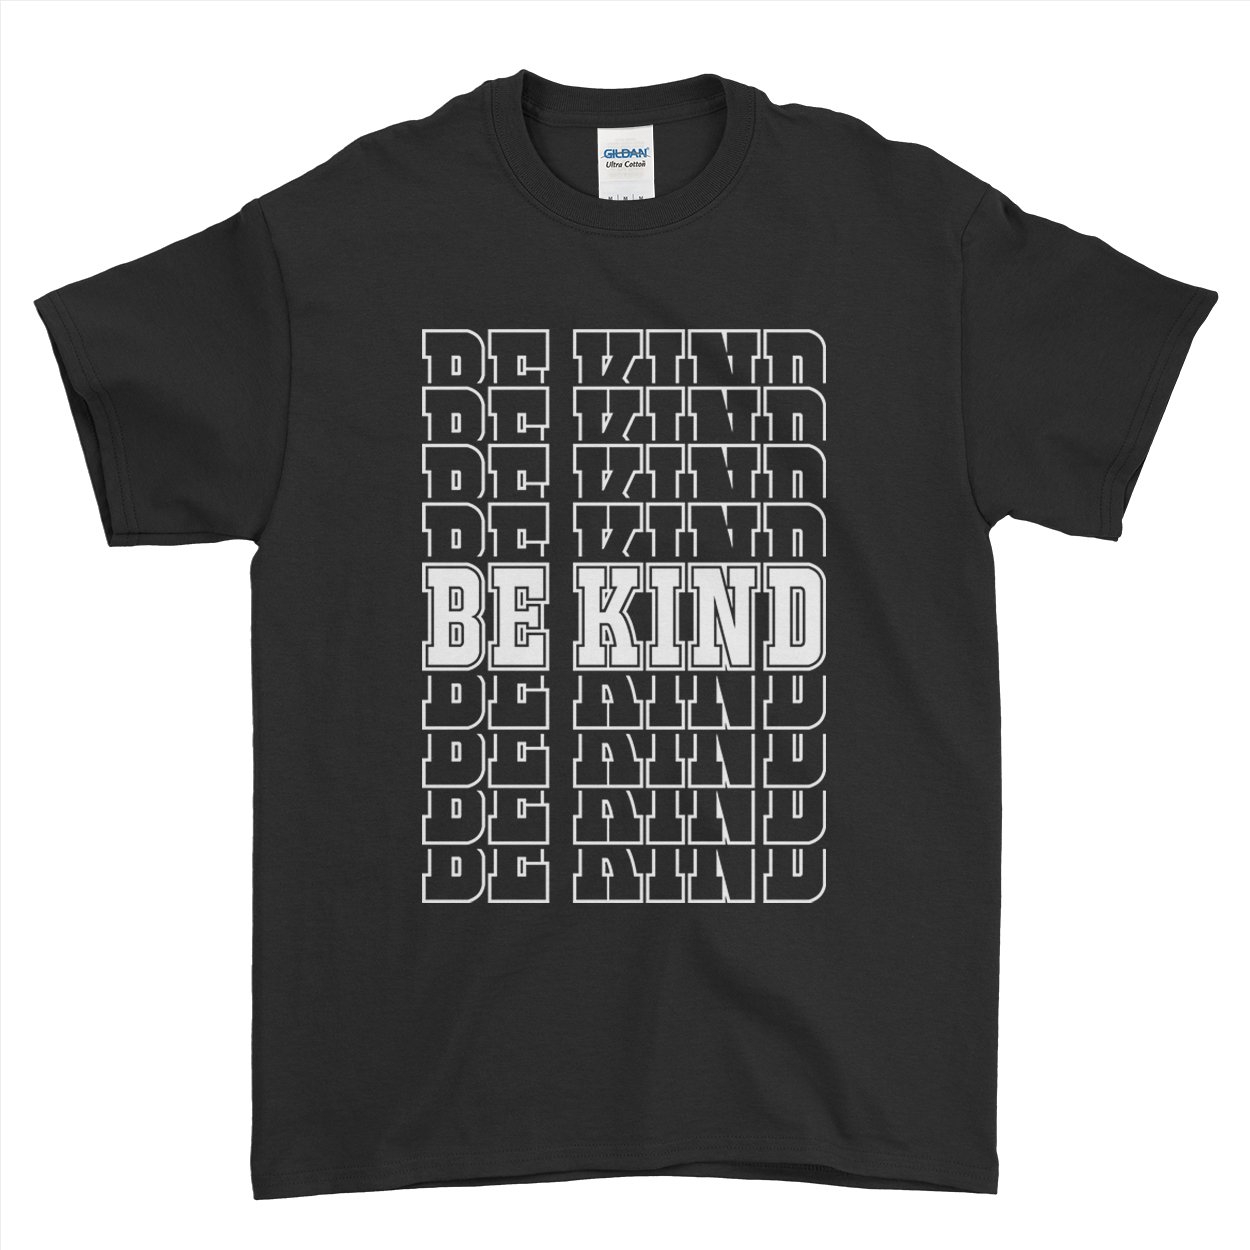 IN A WORLD WHERE YOU CAN BE ANYTHING, BE KIND T-SHIRT – Ai Printing, M / Sand